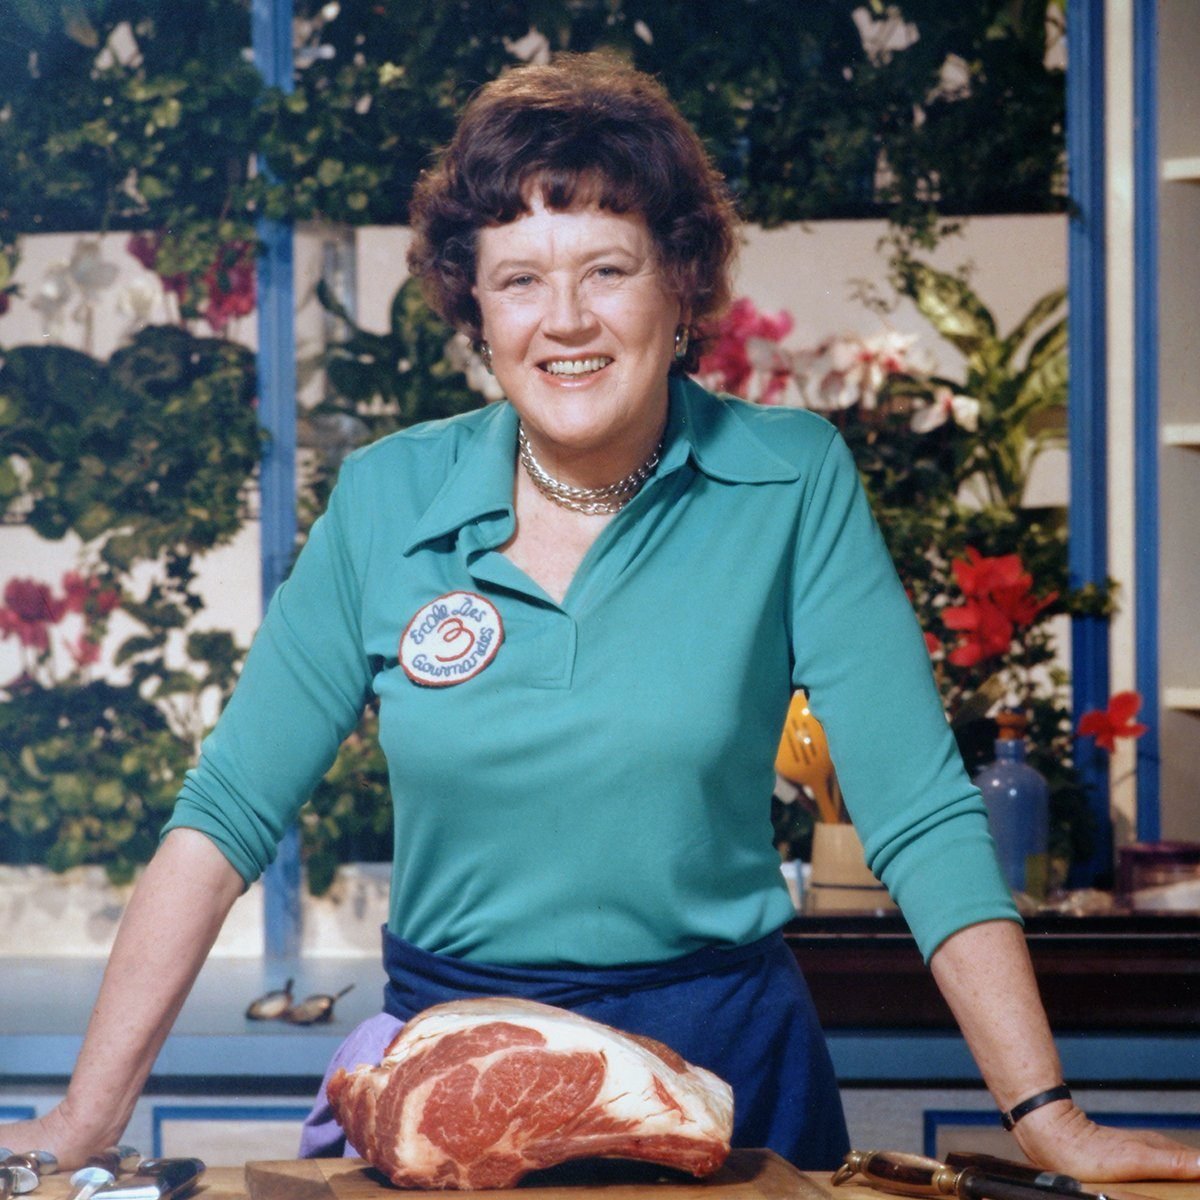 A portrait of the American chef Julia Child (1912 - 2004) shows her standing with a cut of meat in her kitchen, late 20th century. (Photo by Bachrach/Getty Images)